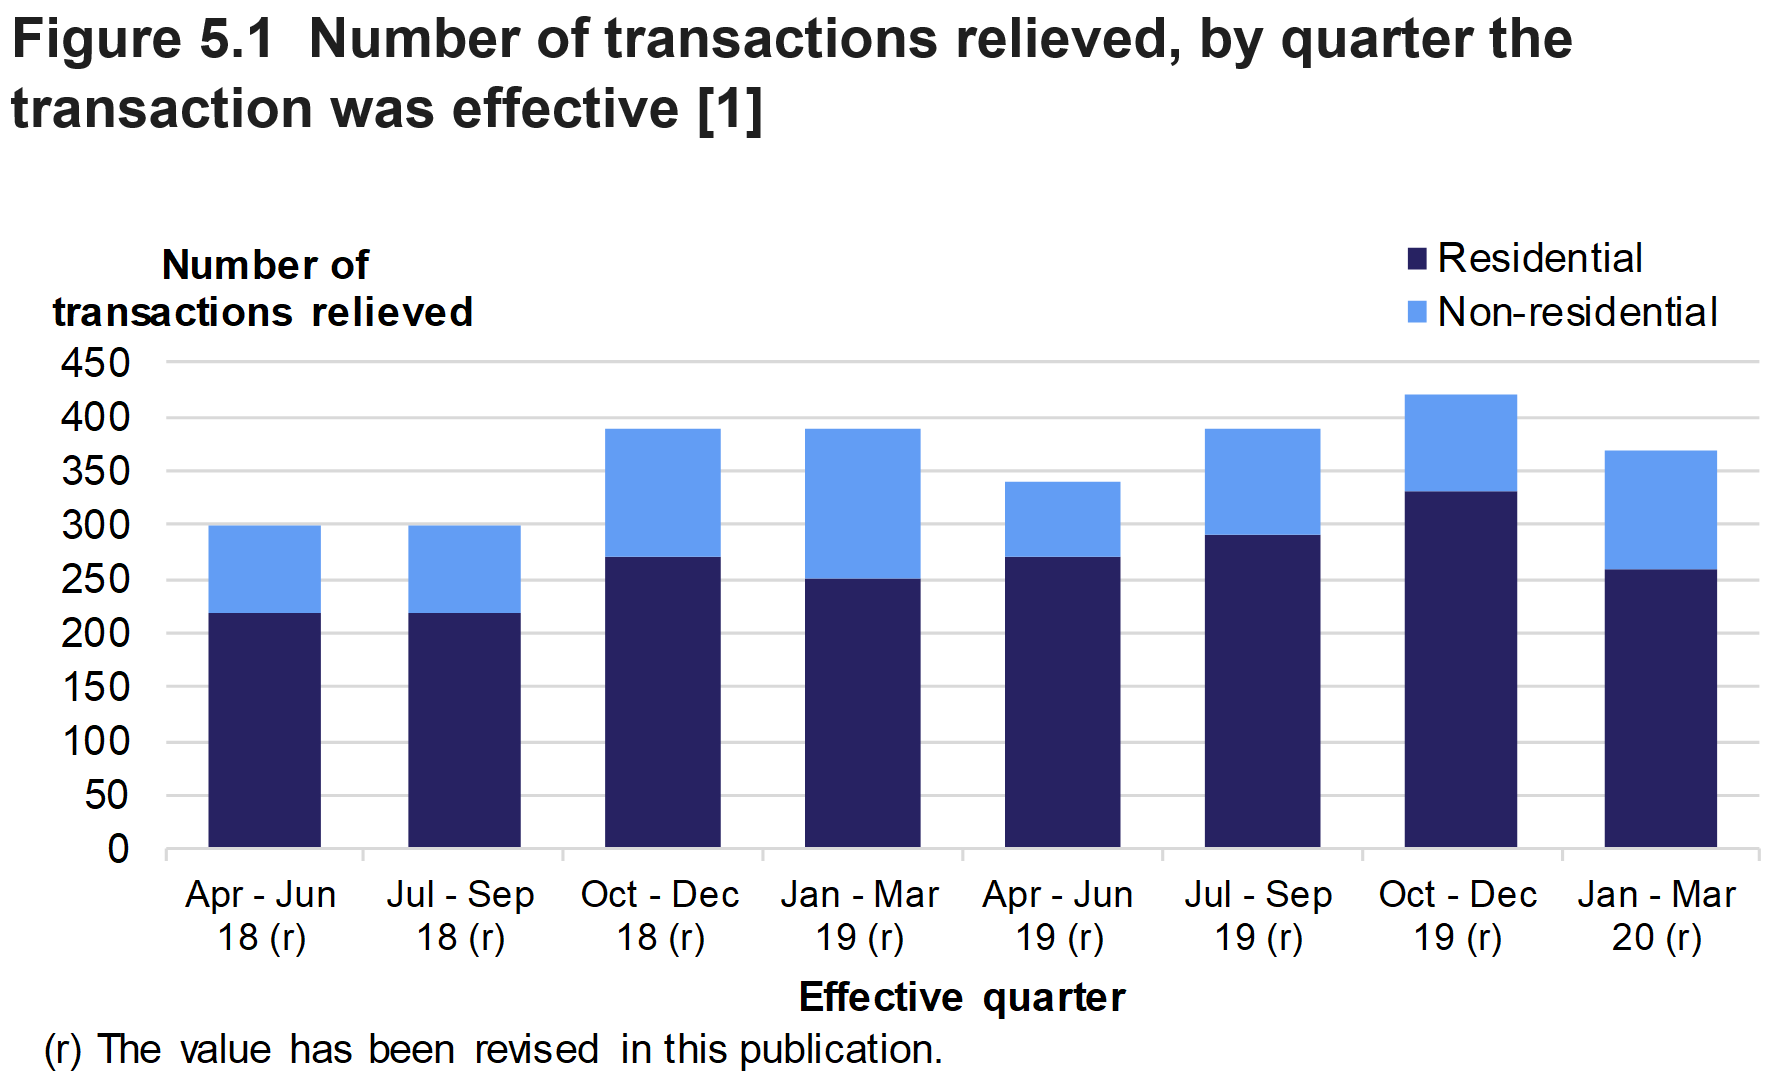 Figure 5.1 shows the number of reliefs applied to residential and non-residential transactions, by type of relief and quarter the transaction was relieved. 